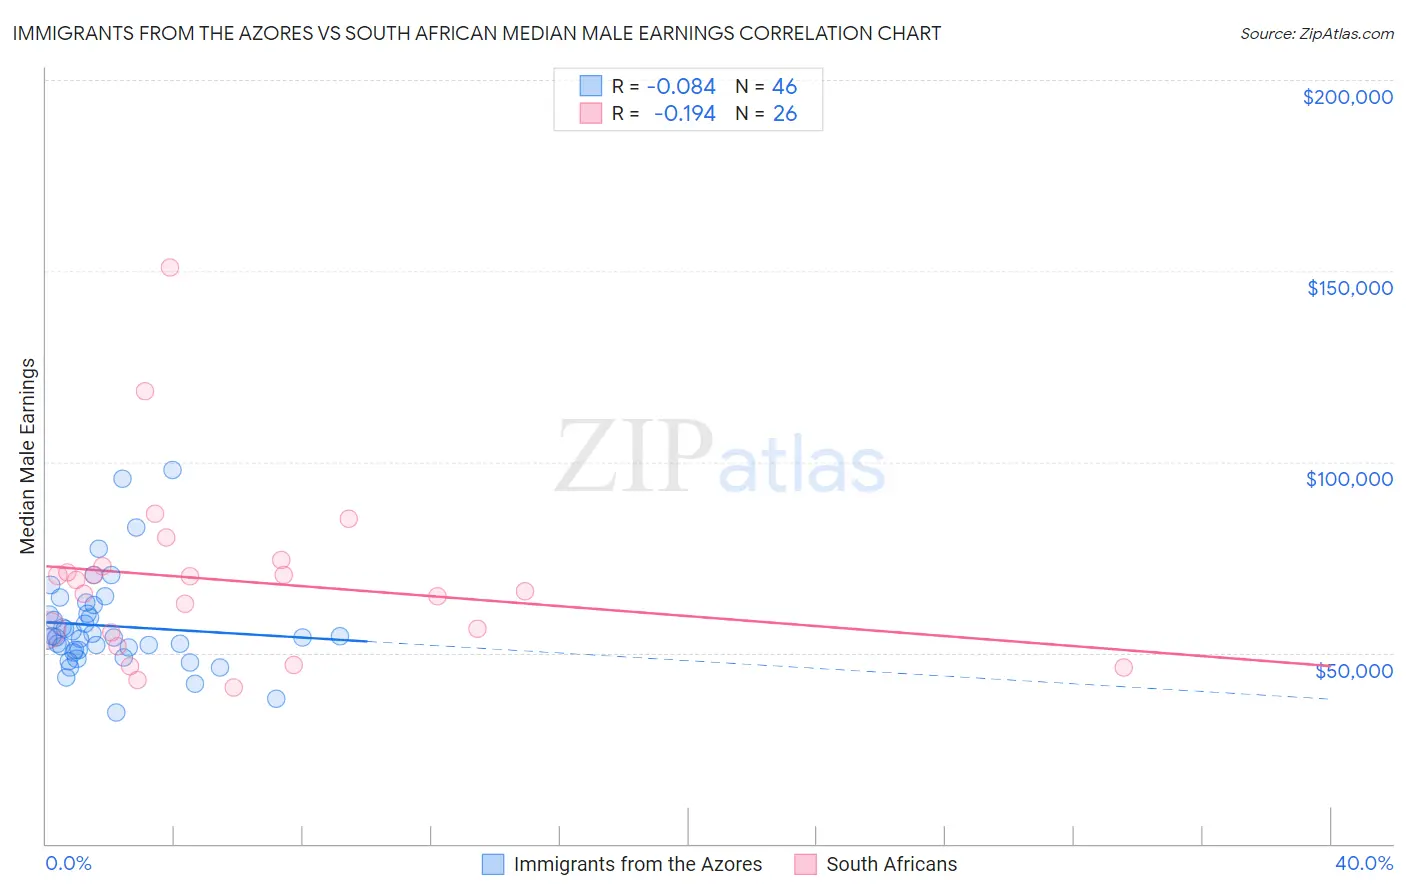 Immigrants from the Azores vs South African Median Male Earnings